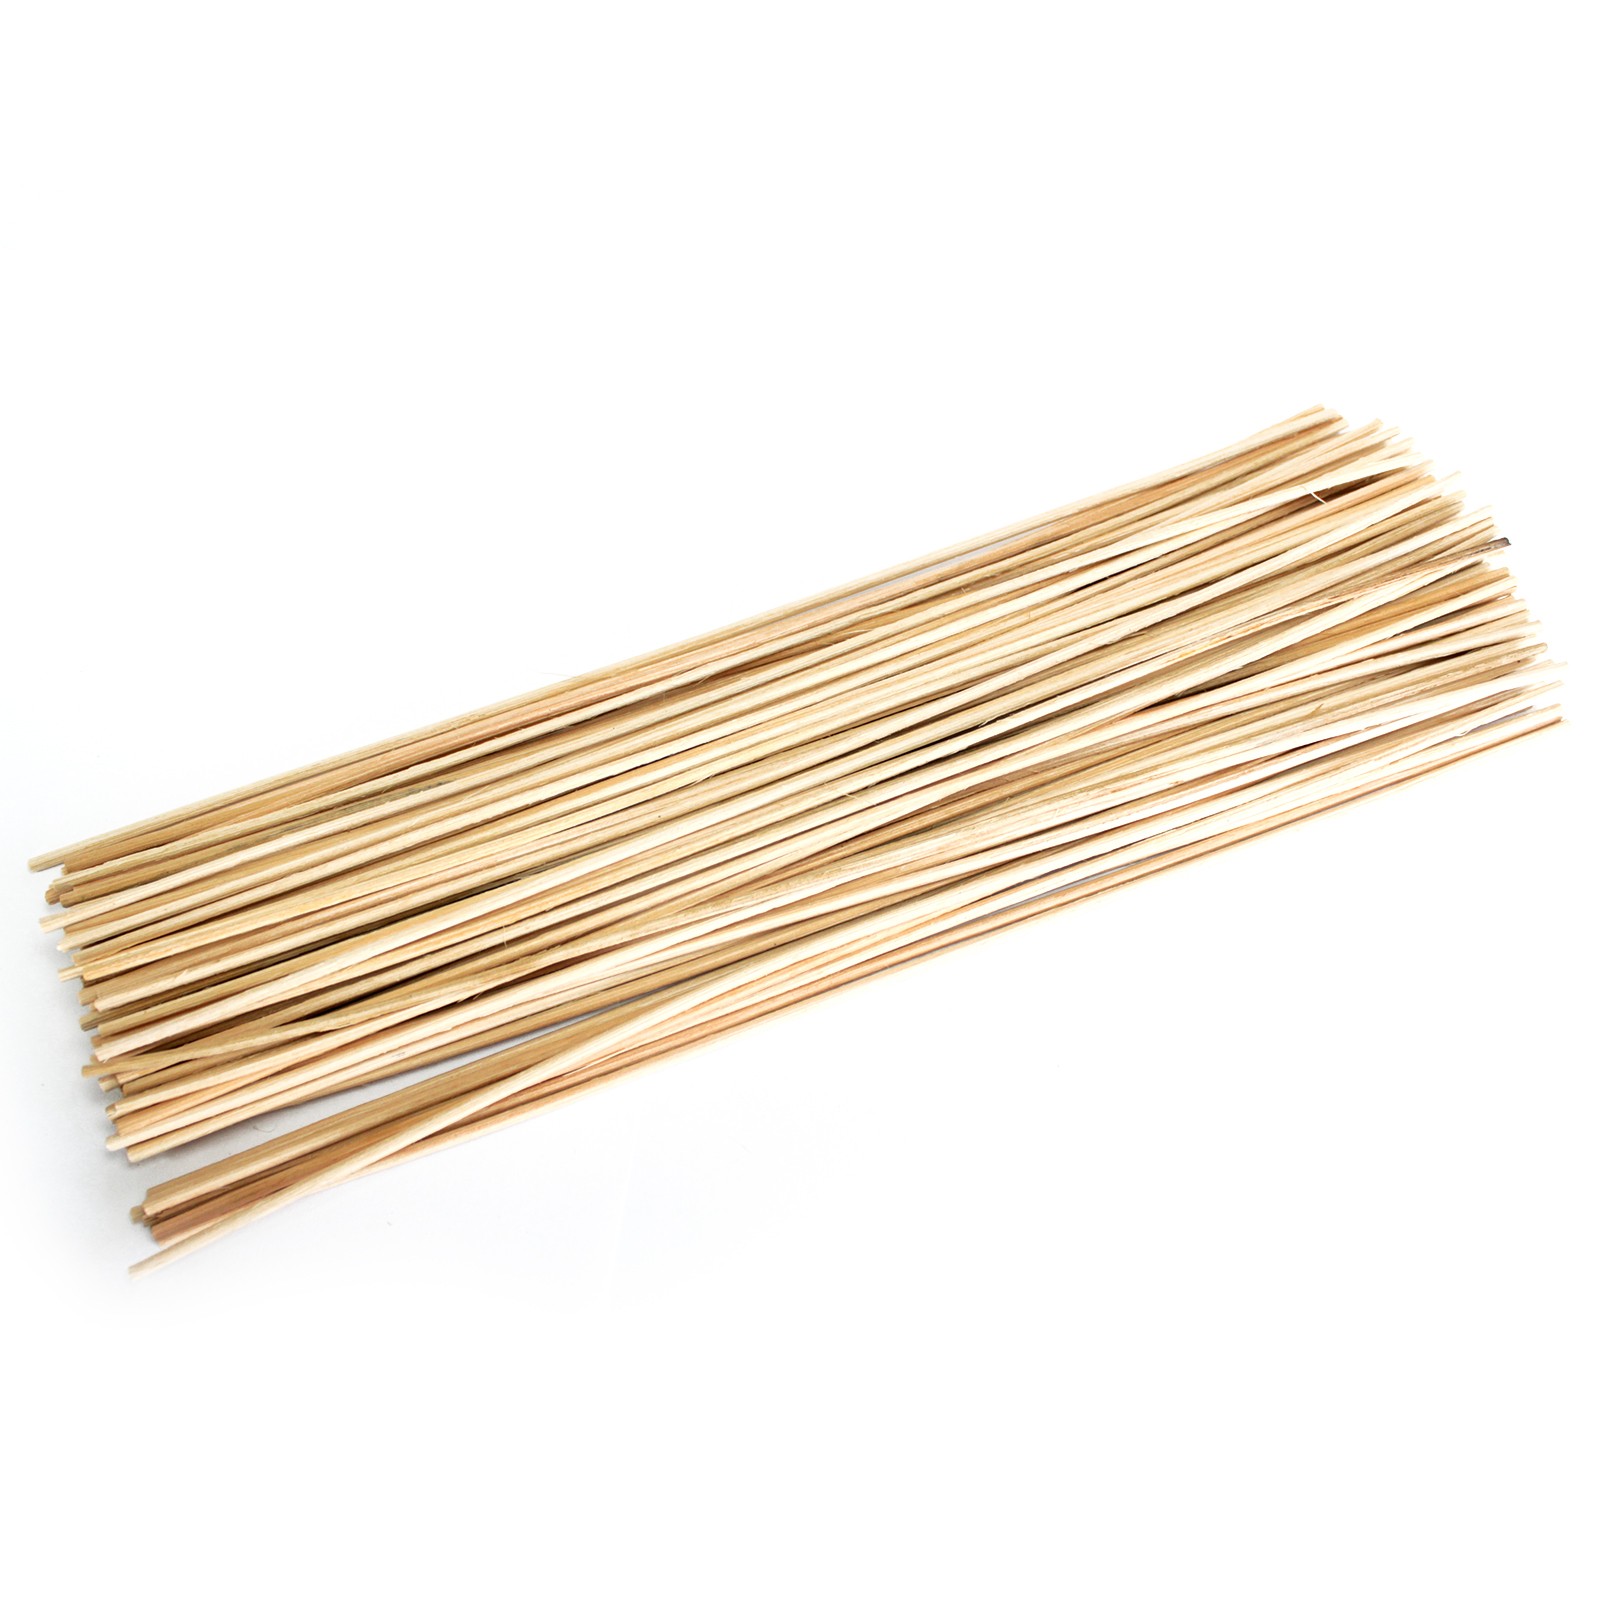 36 Pack of Replacement Reeds 2.5mm